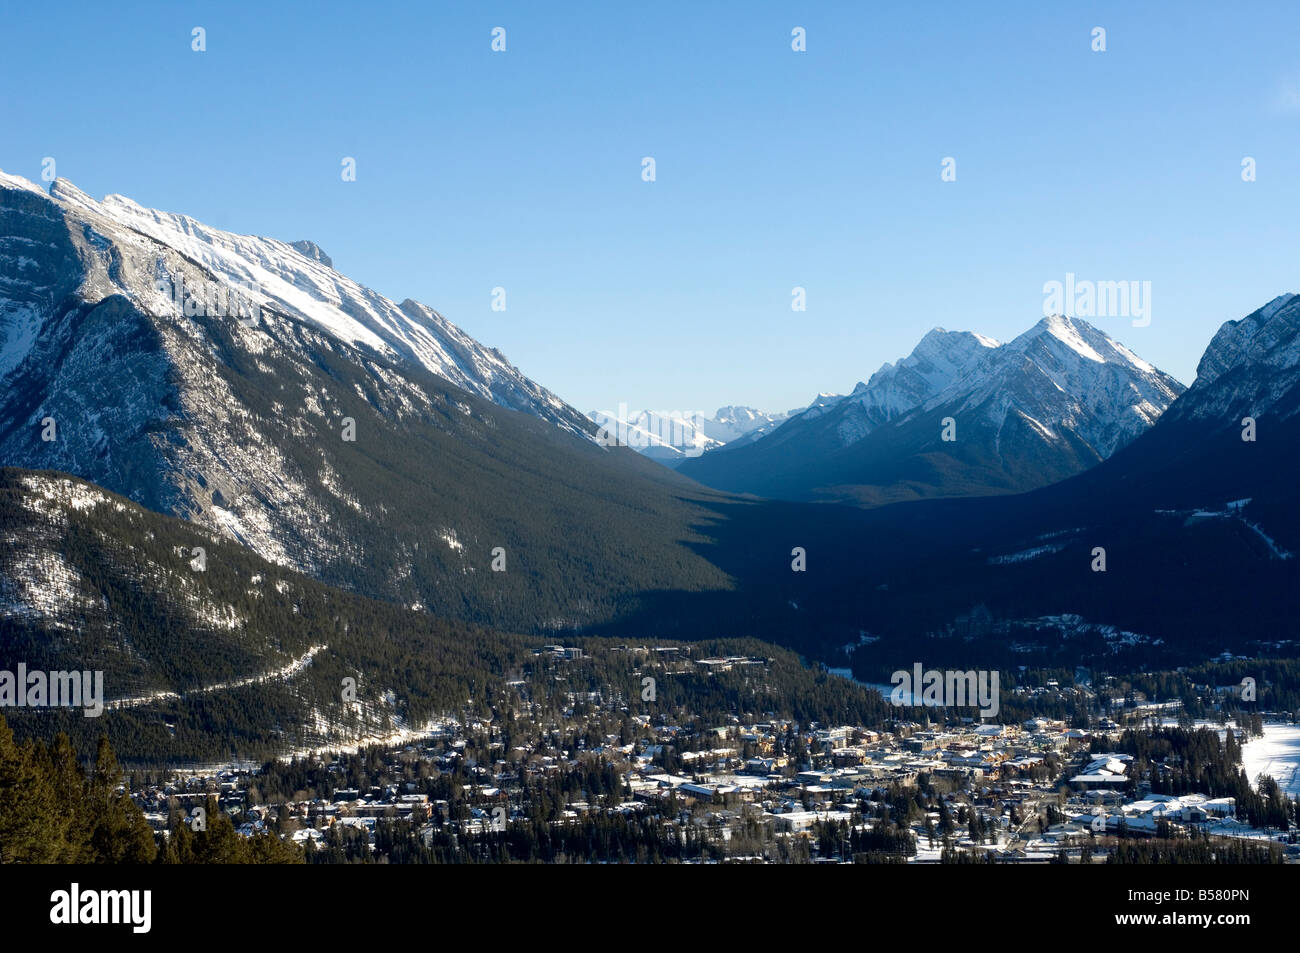 Banff surrounded by Canadian Rocky Mountains, Alberta, Canada, North America Stock Photo